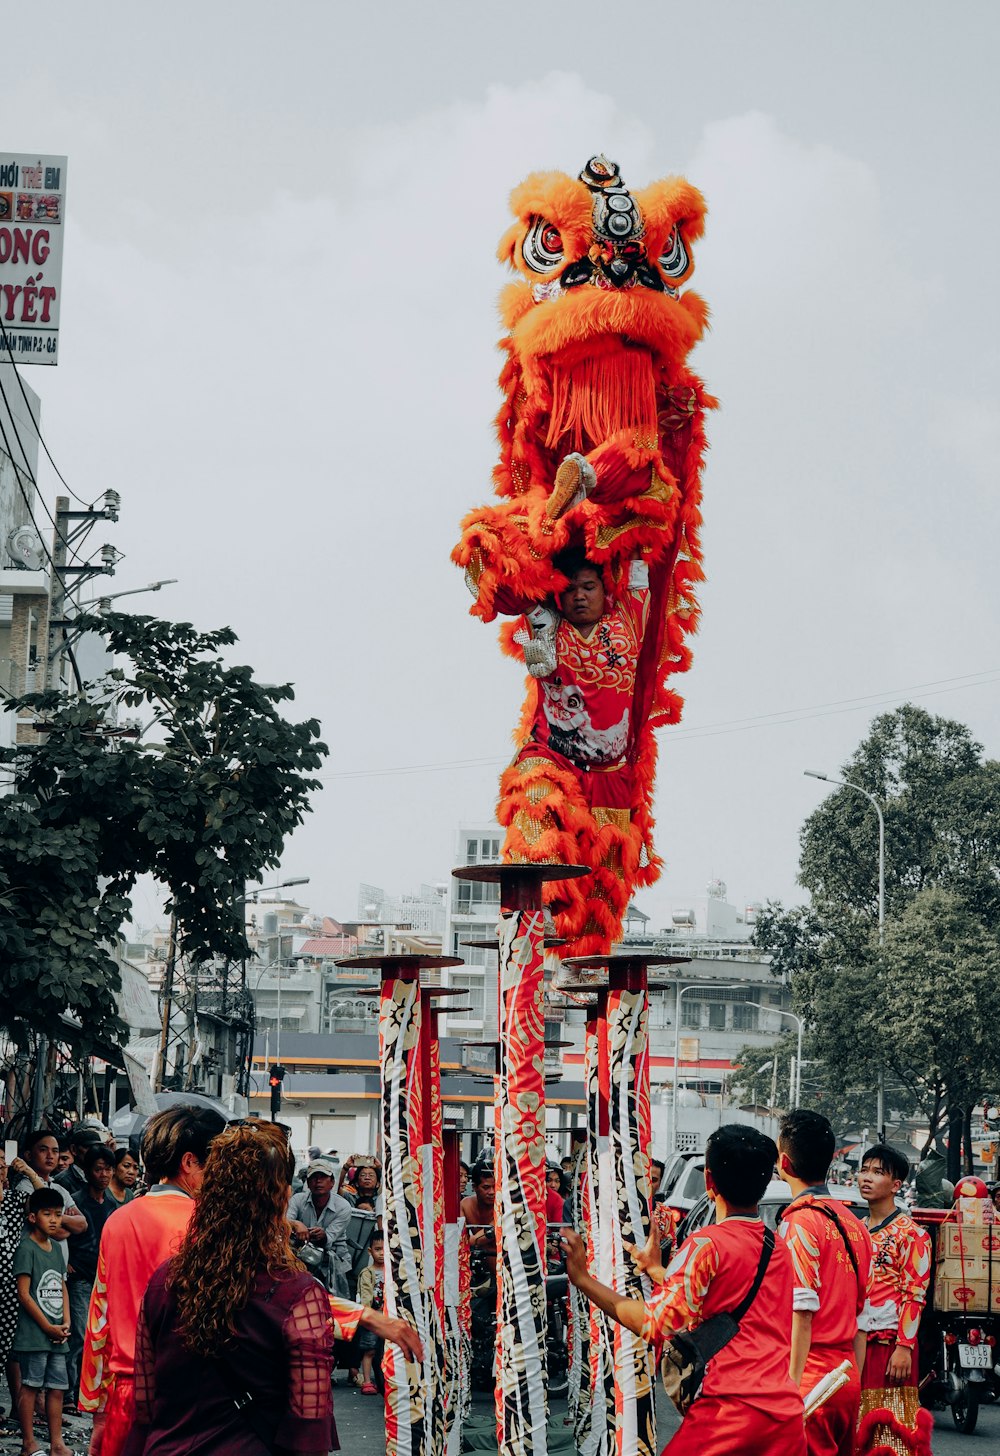 people walking on street with red dragon statue during daytime